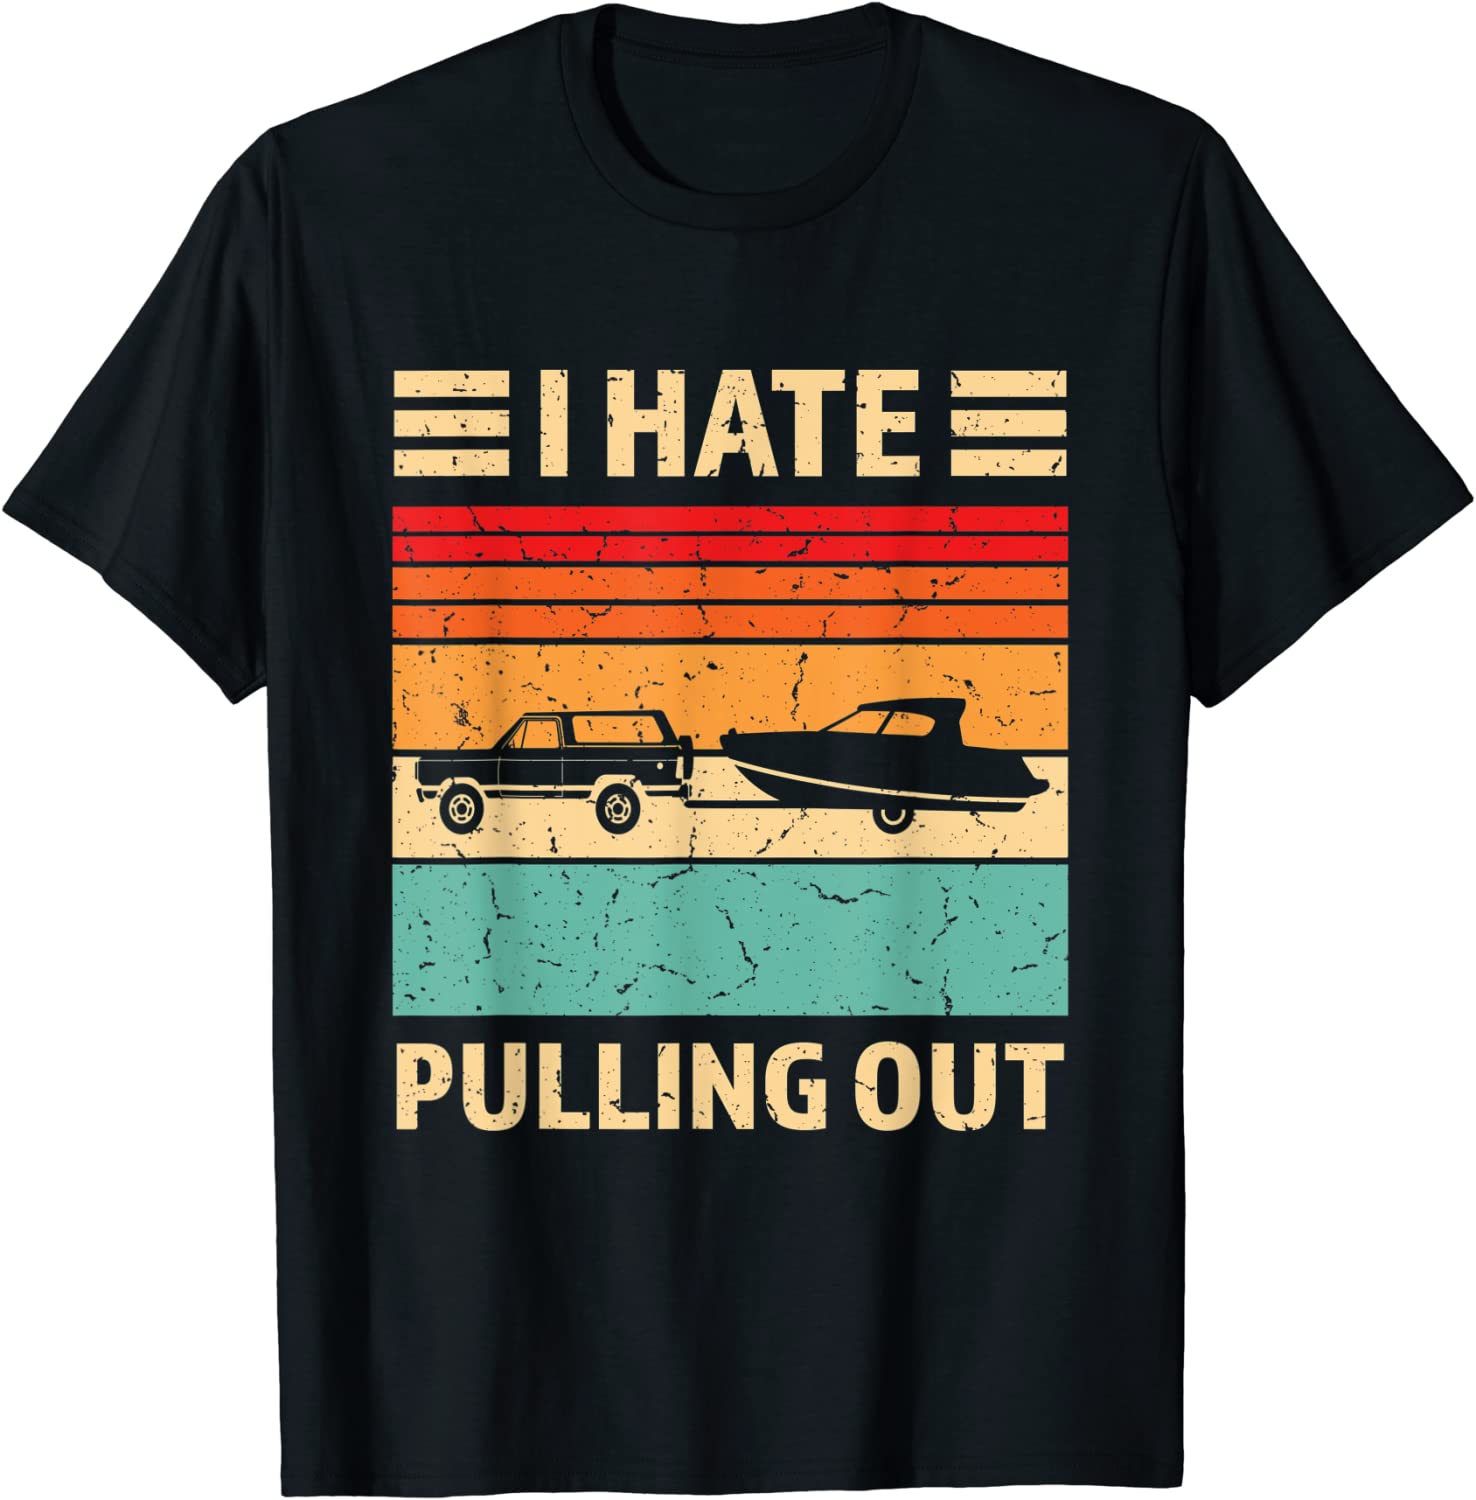 Retro Boating I Hate Pulling Out Boat Captain 2022 Shirt - Teeducks